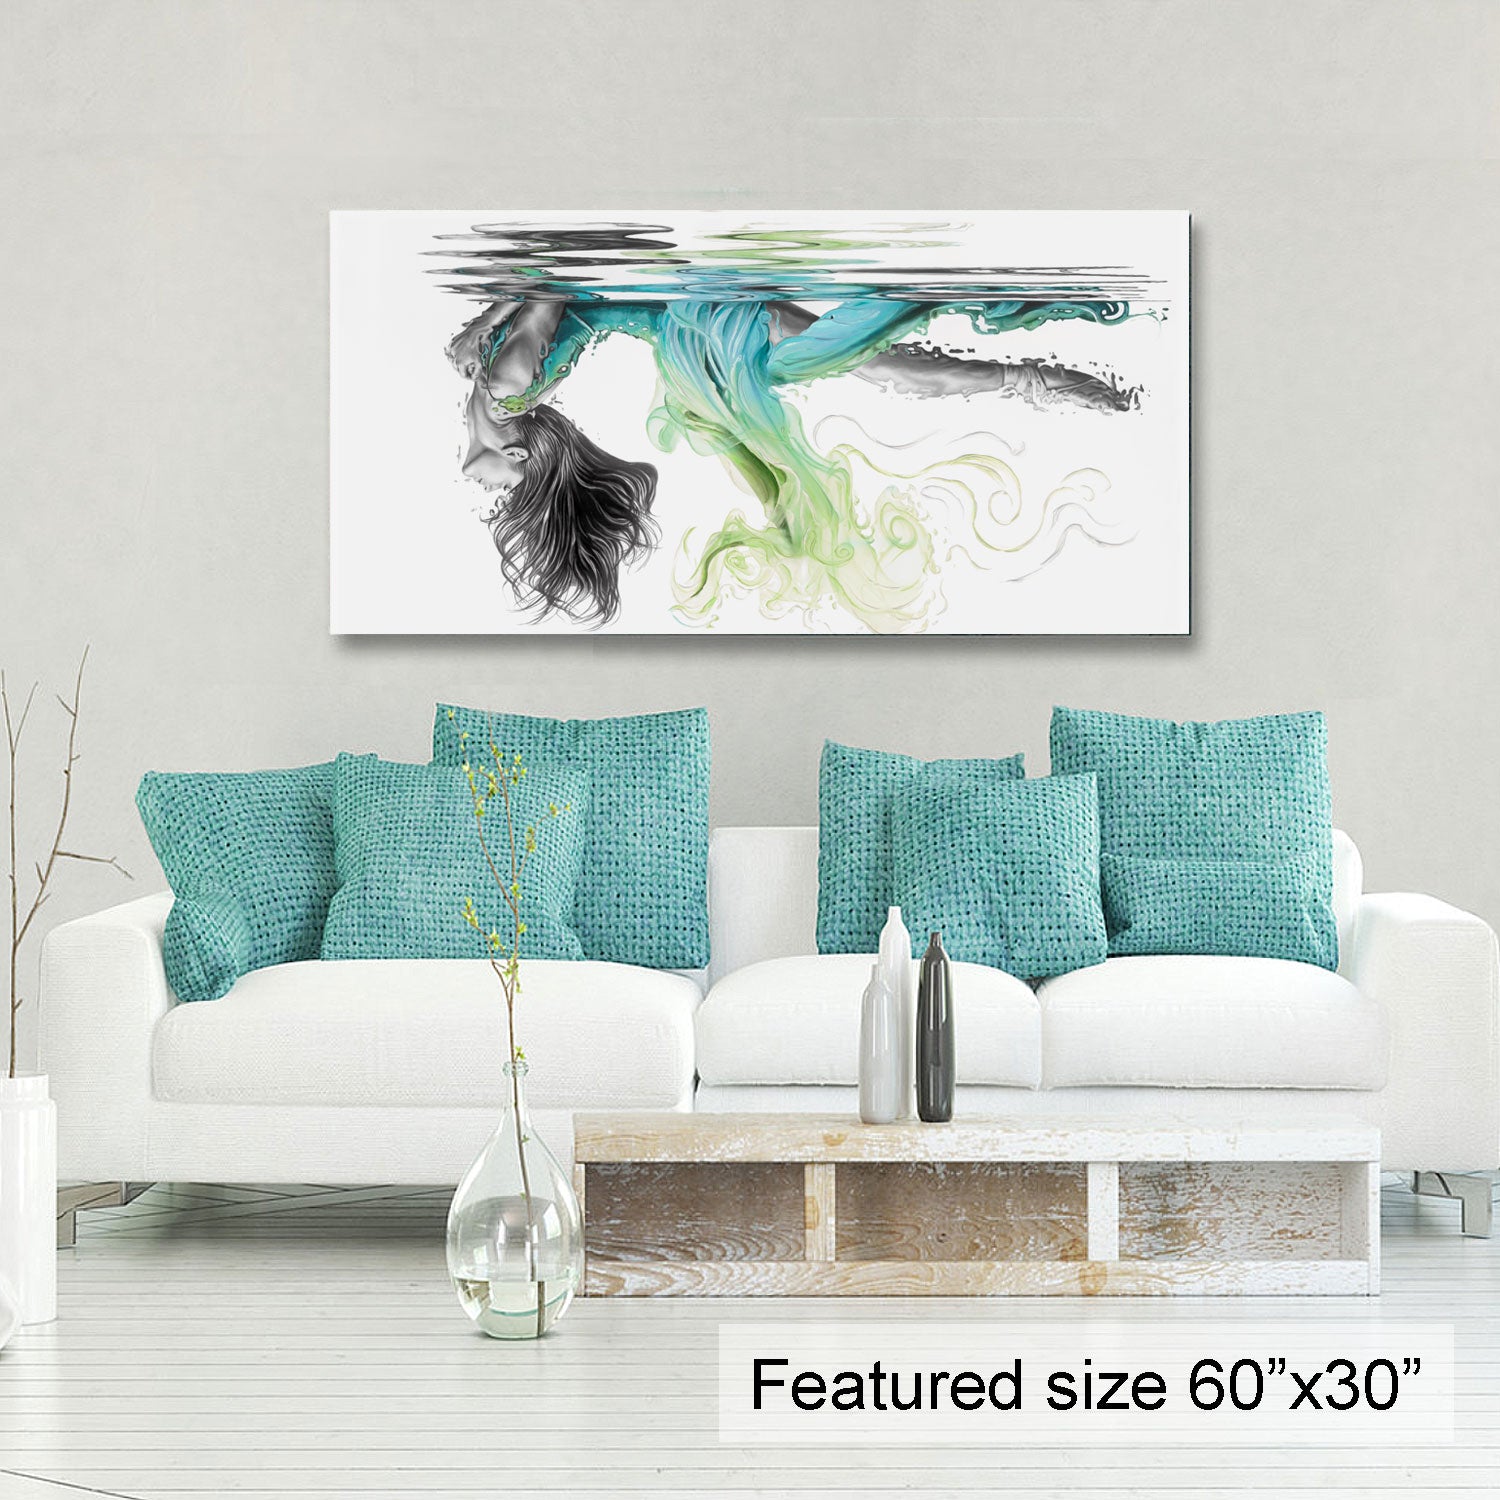 "Peace" - Limited edition 60"x30" (green/teal)